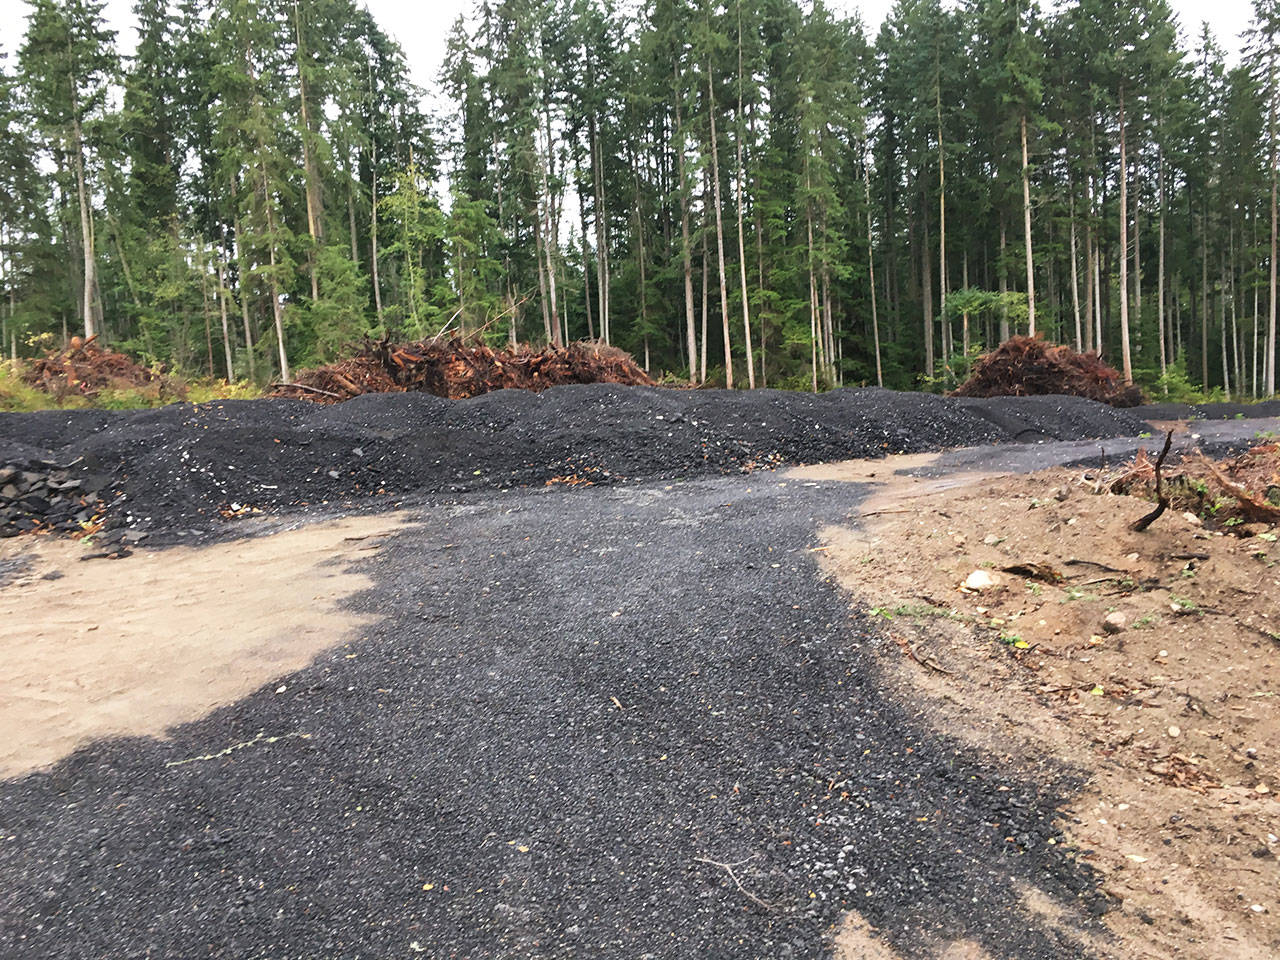 Members of the Whidbey Environmental Action Network have filed complaints to the county regarding large piles of crushed asphalt, such as the ones on a property on Midvale Road. Photo provided